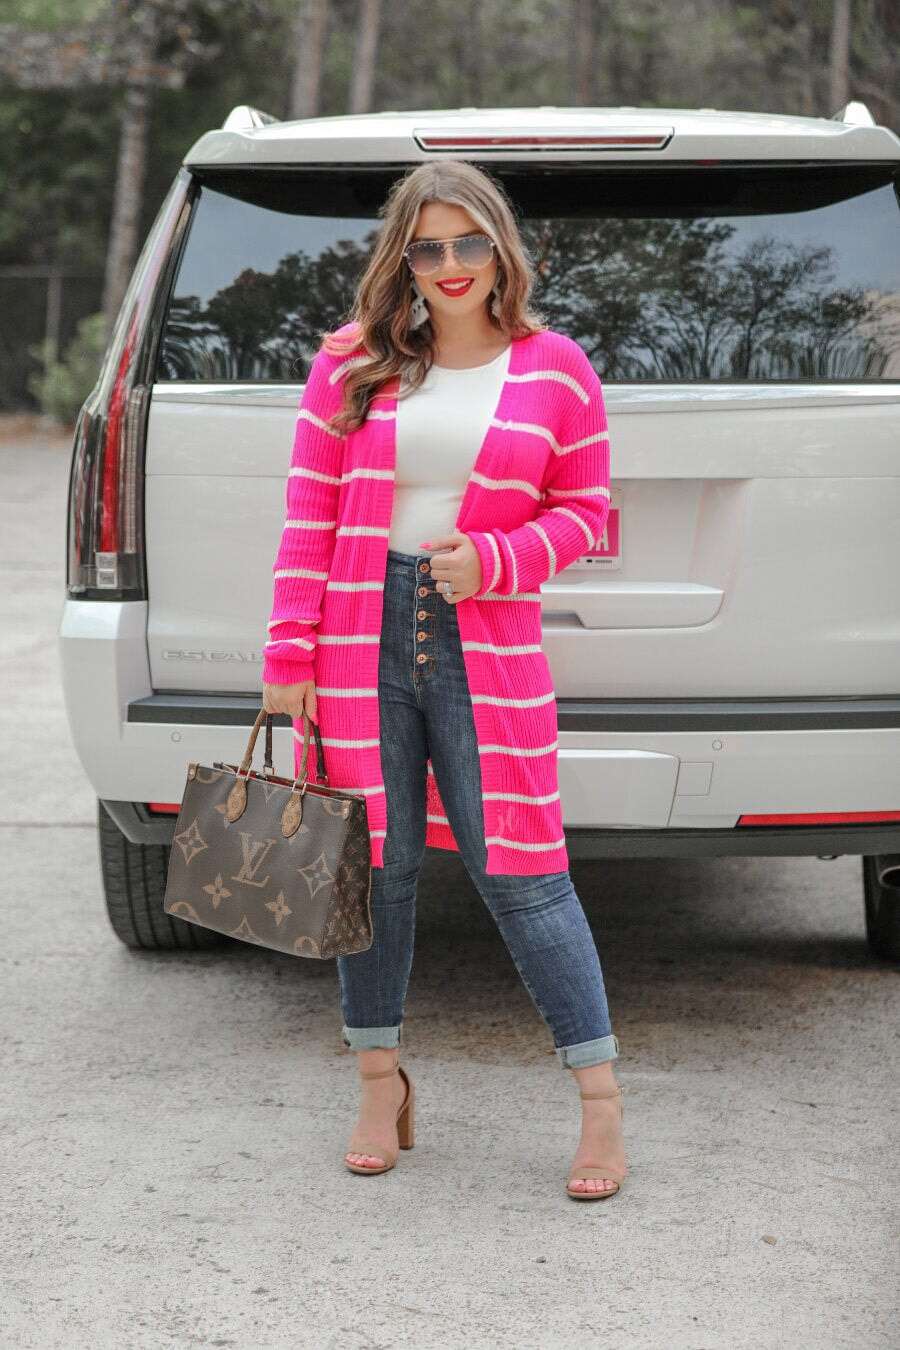 Knee-length hot pink with white stripes cardigan.